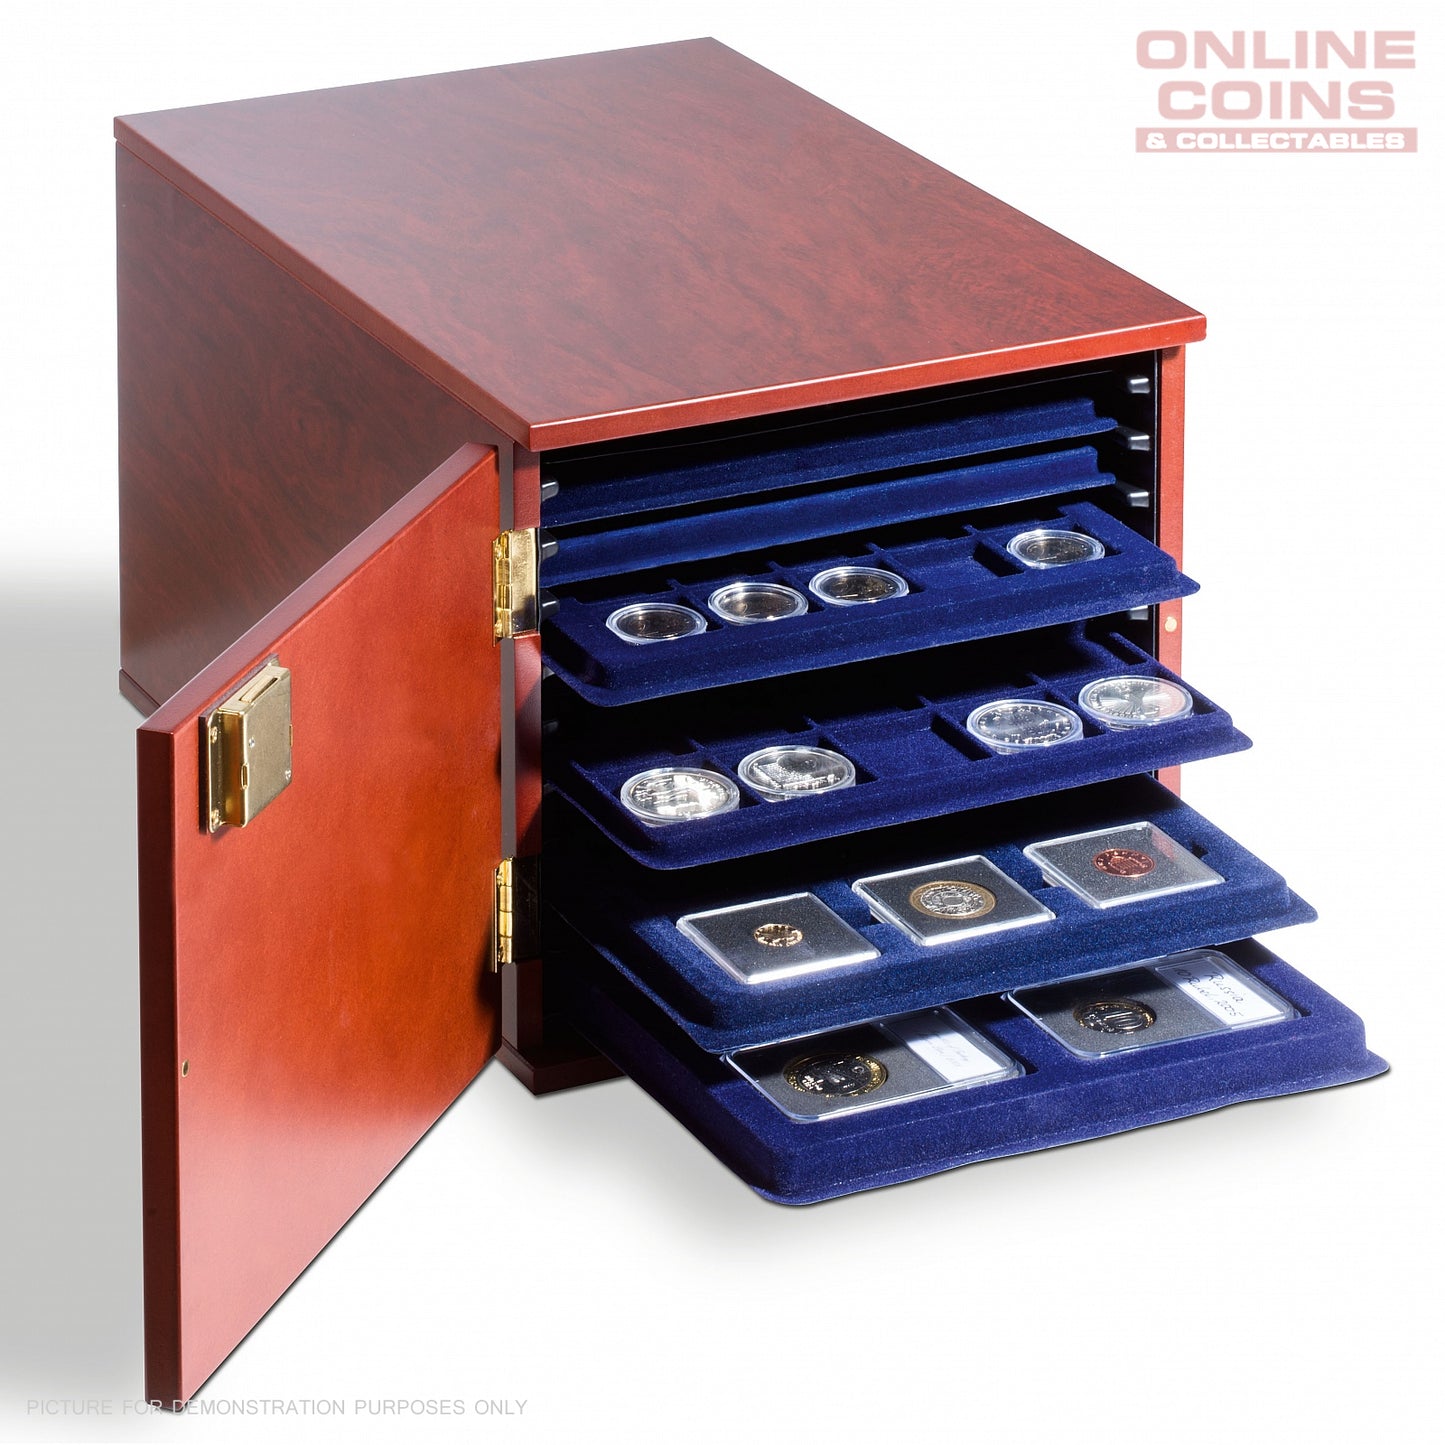 Lighthouse MAHOGANY MKAB10M Lockable Coin Case for up to 10 TAB Coin Trays